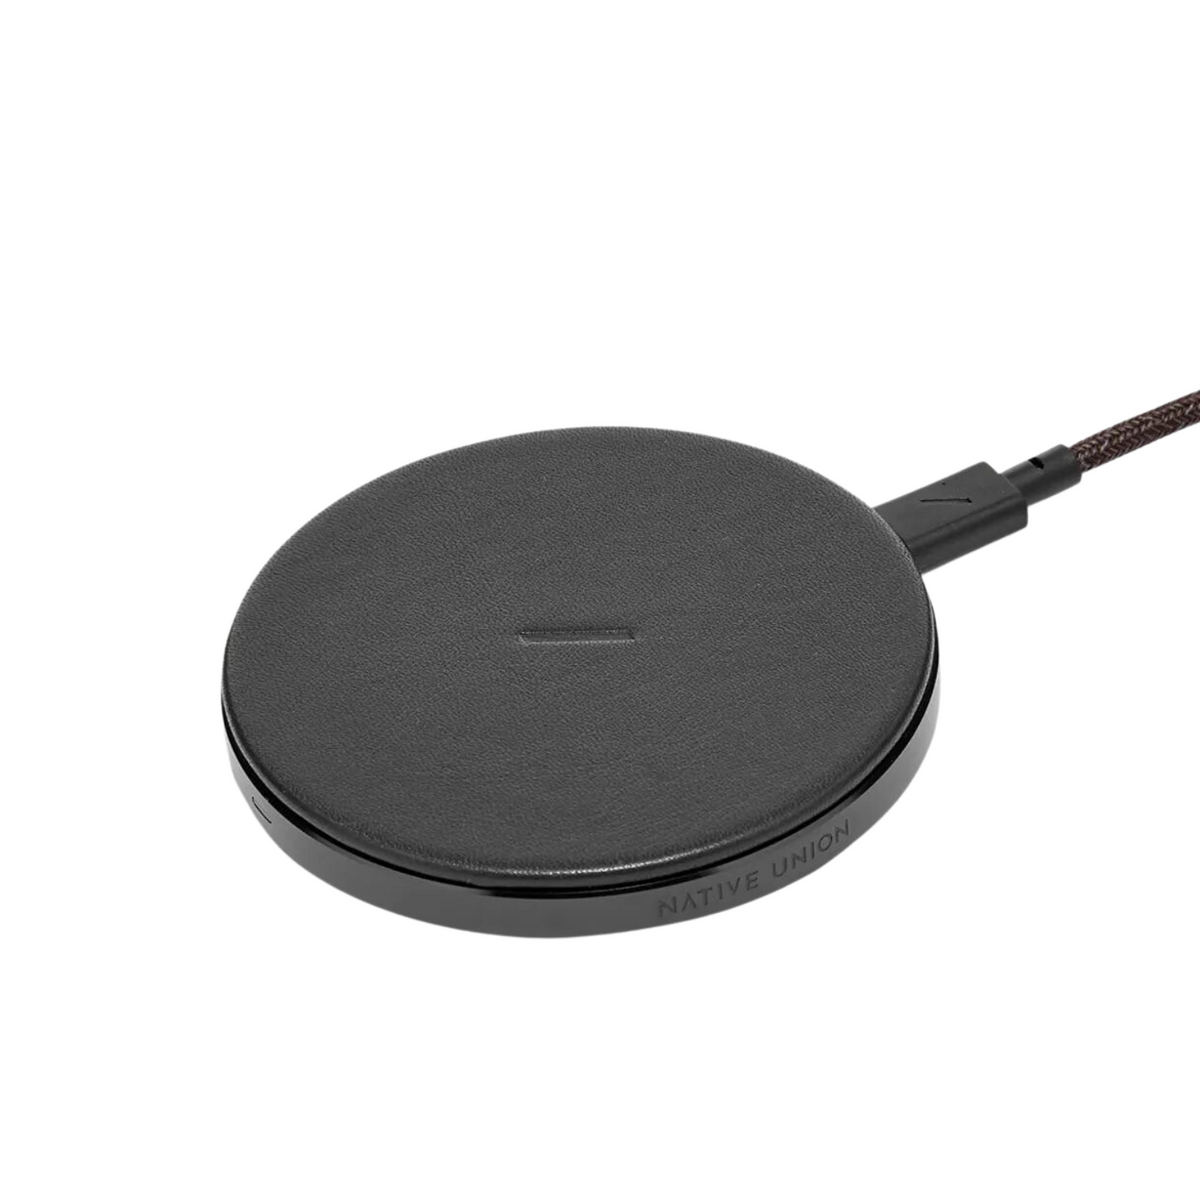 DROP WIRELESS CHARGER - BLACK LEATHER